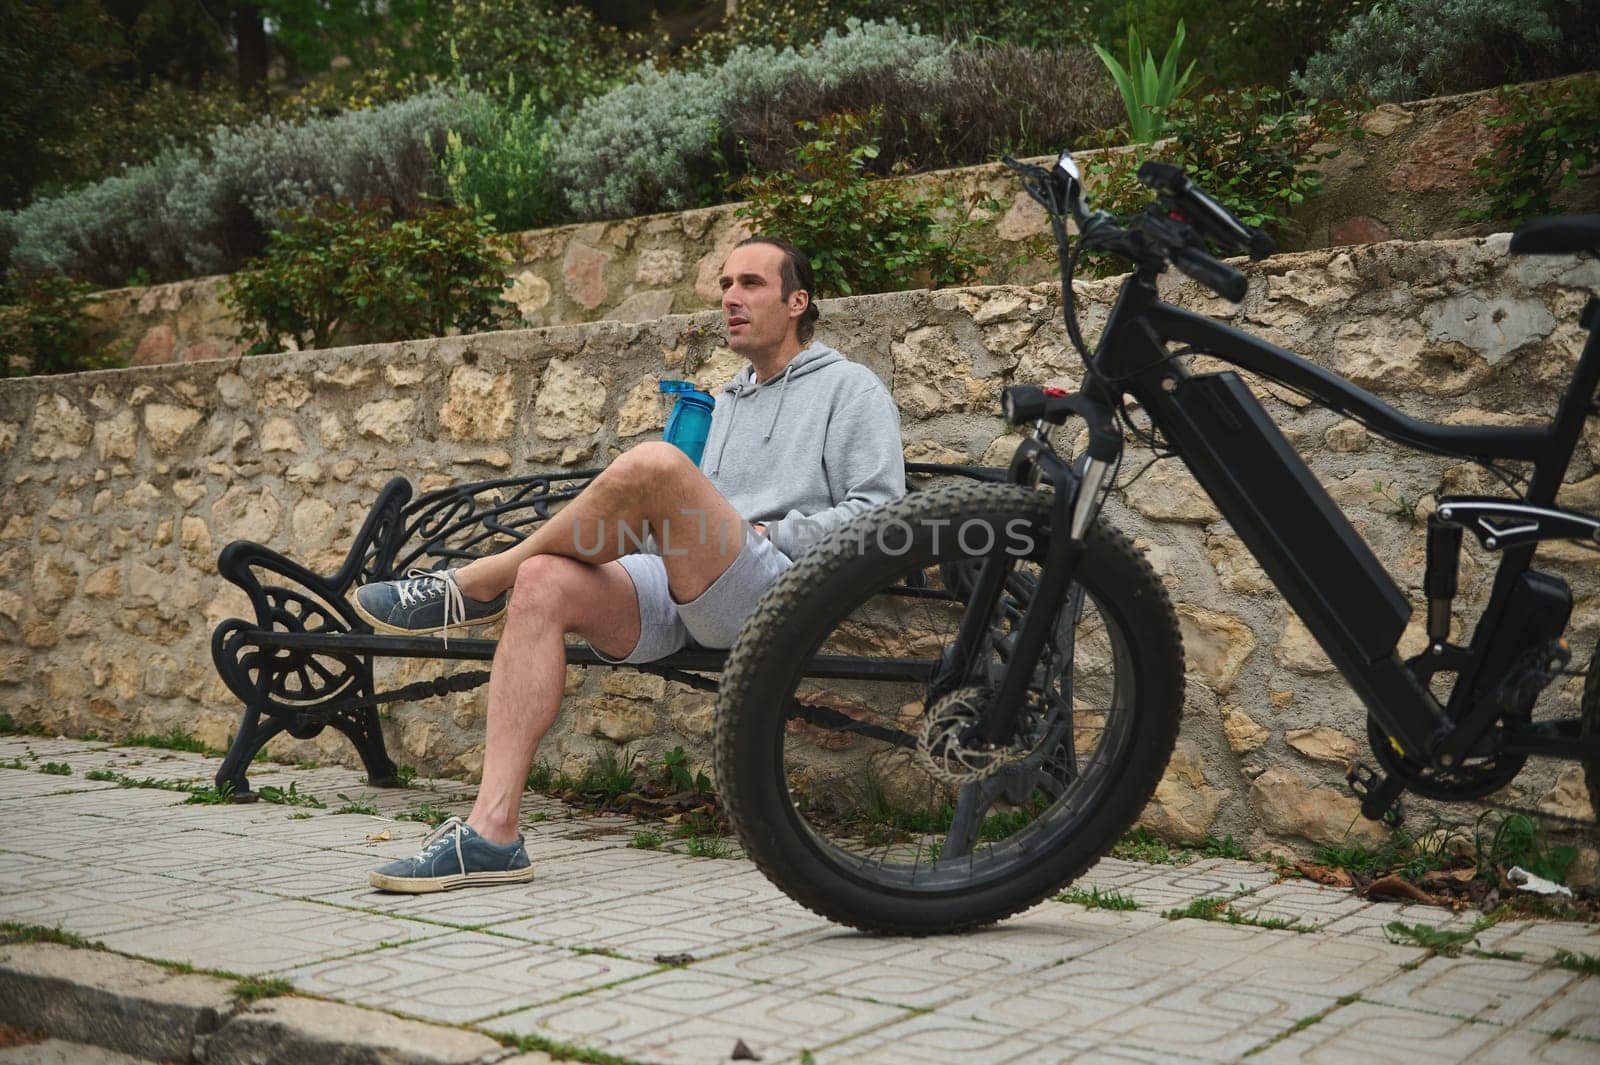 young man cyclist in sportswear, drinking water from sports bottle in the city, sitting on a bench, relaxing after riding an eco-friendly e-bike motorbike. Electric bicycle in the foreground by artgf